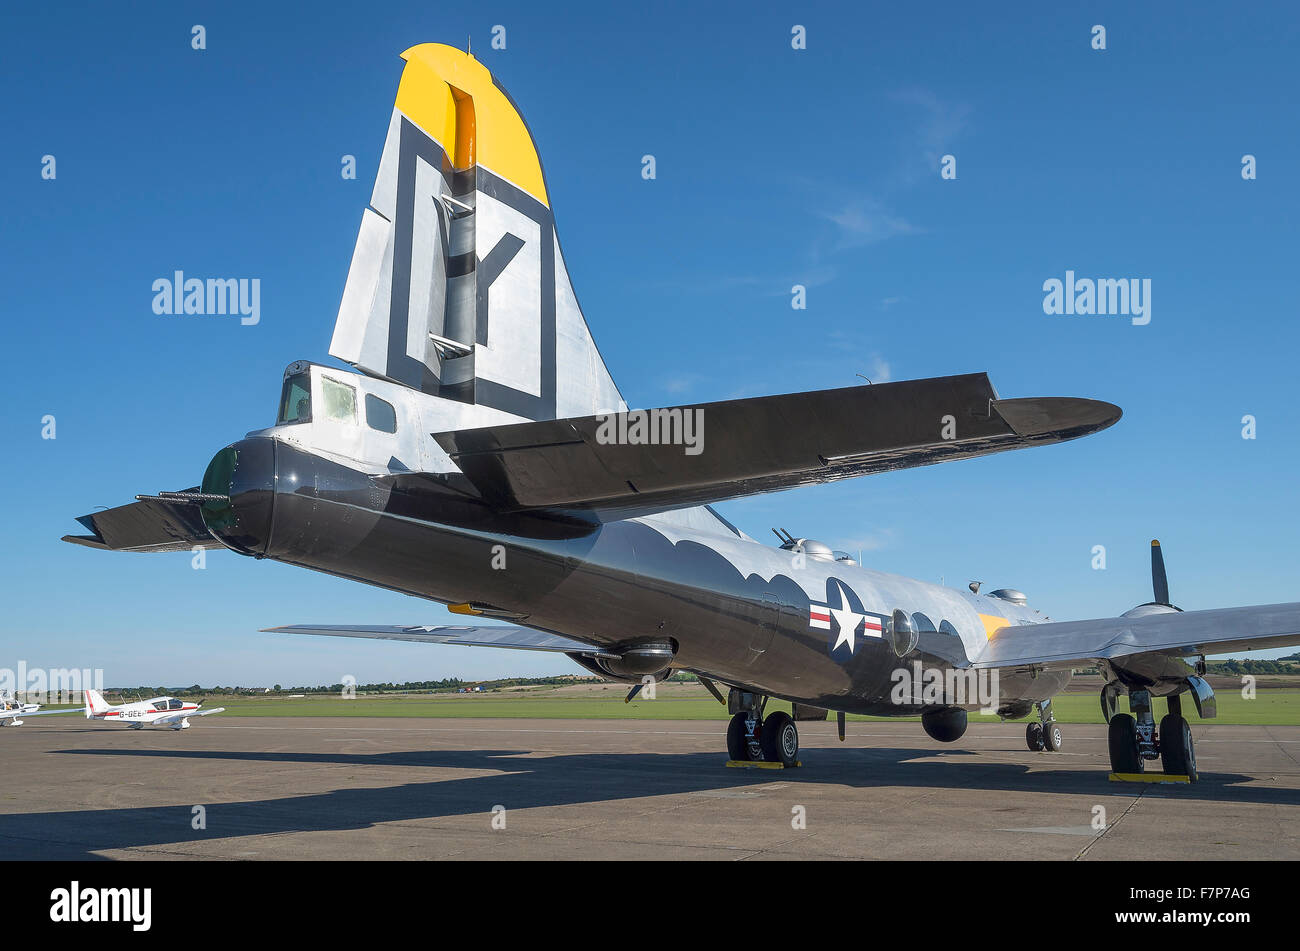 Tail section of an American B29 bomber from WWII at Duxfordy Stock Photo